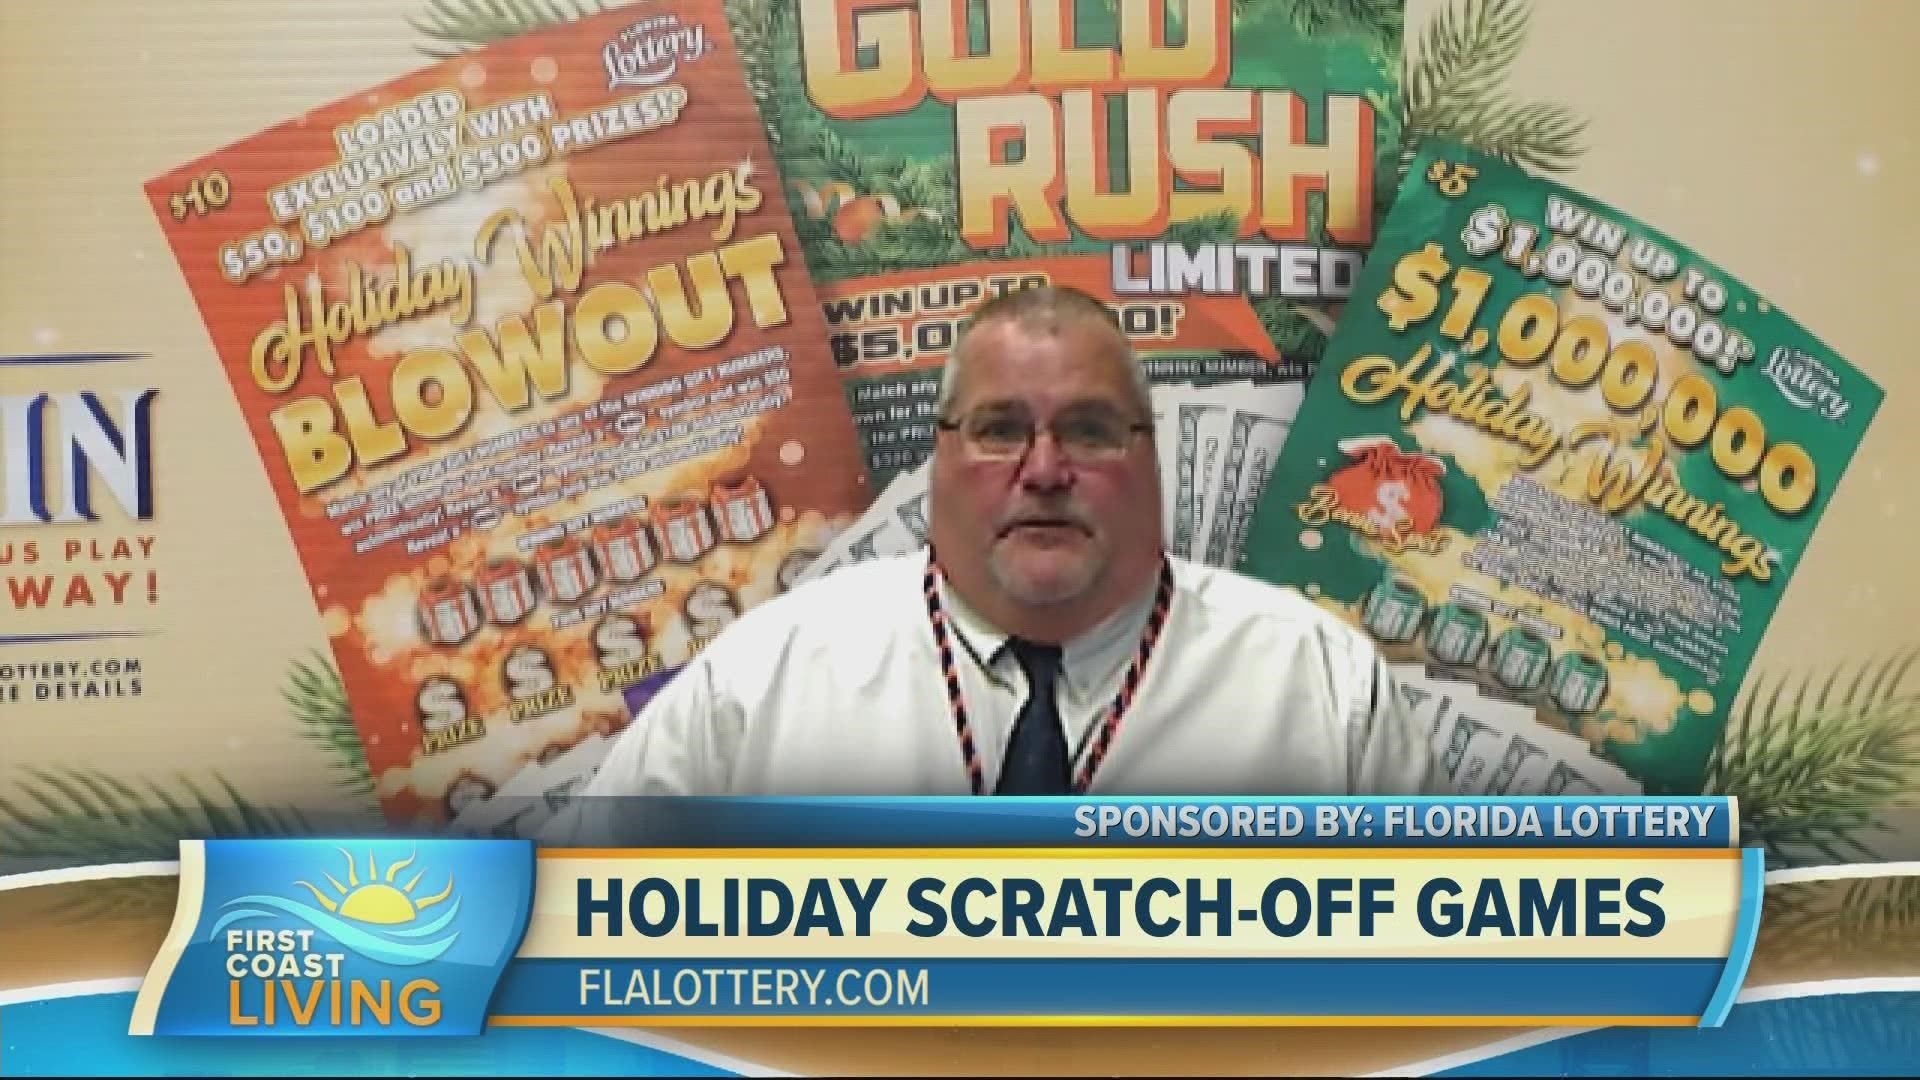 The Florida Lottery has a new holiday-themed family of Scratch-Off games. Remember to play responsibly this holiday season.